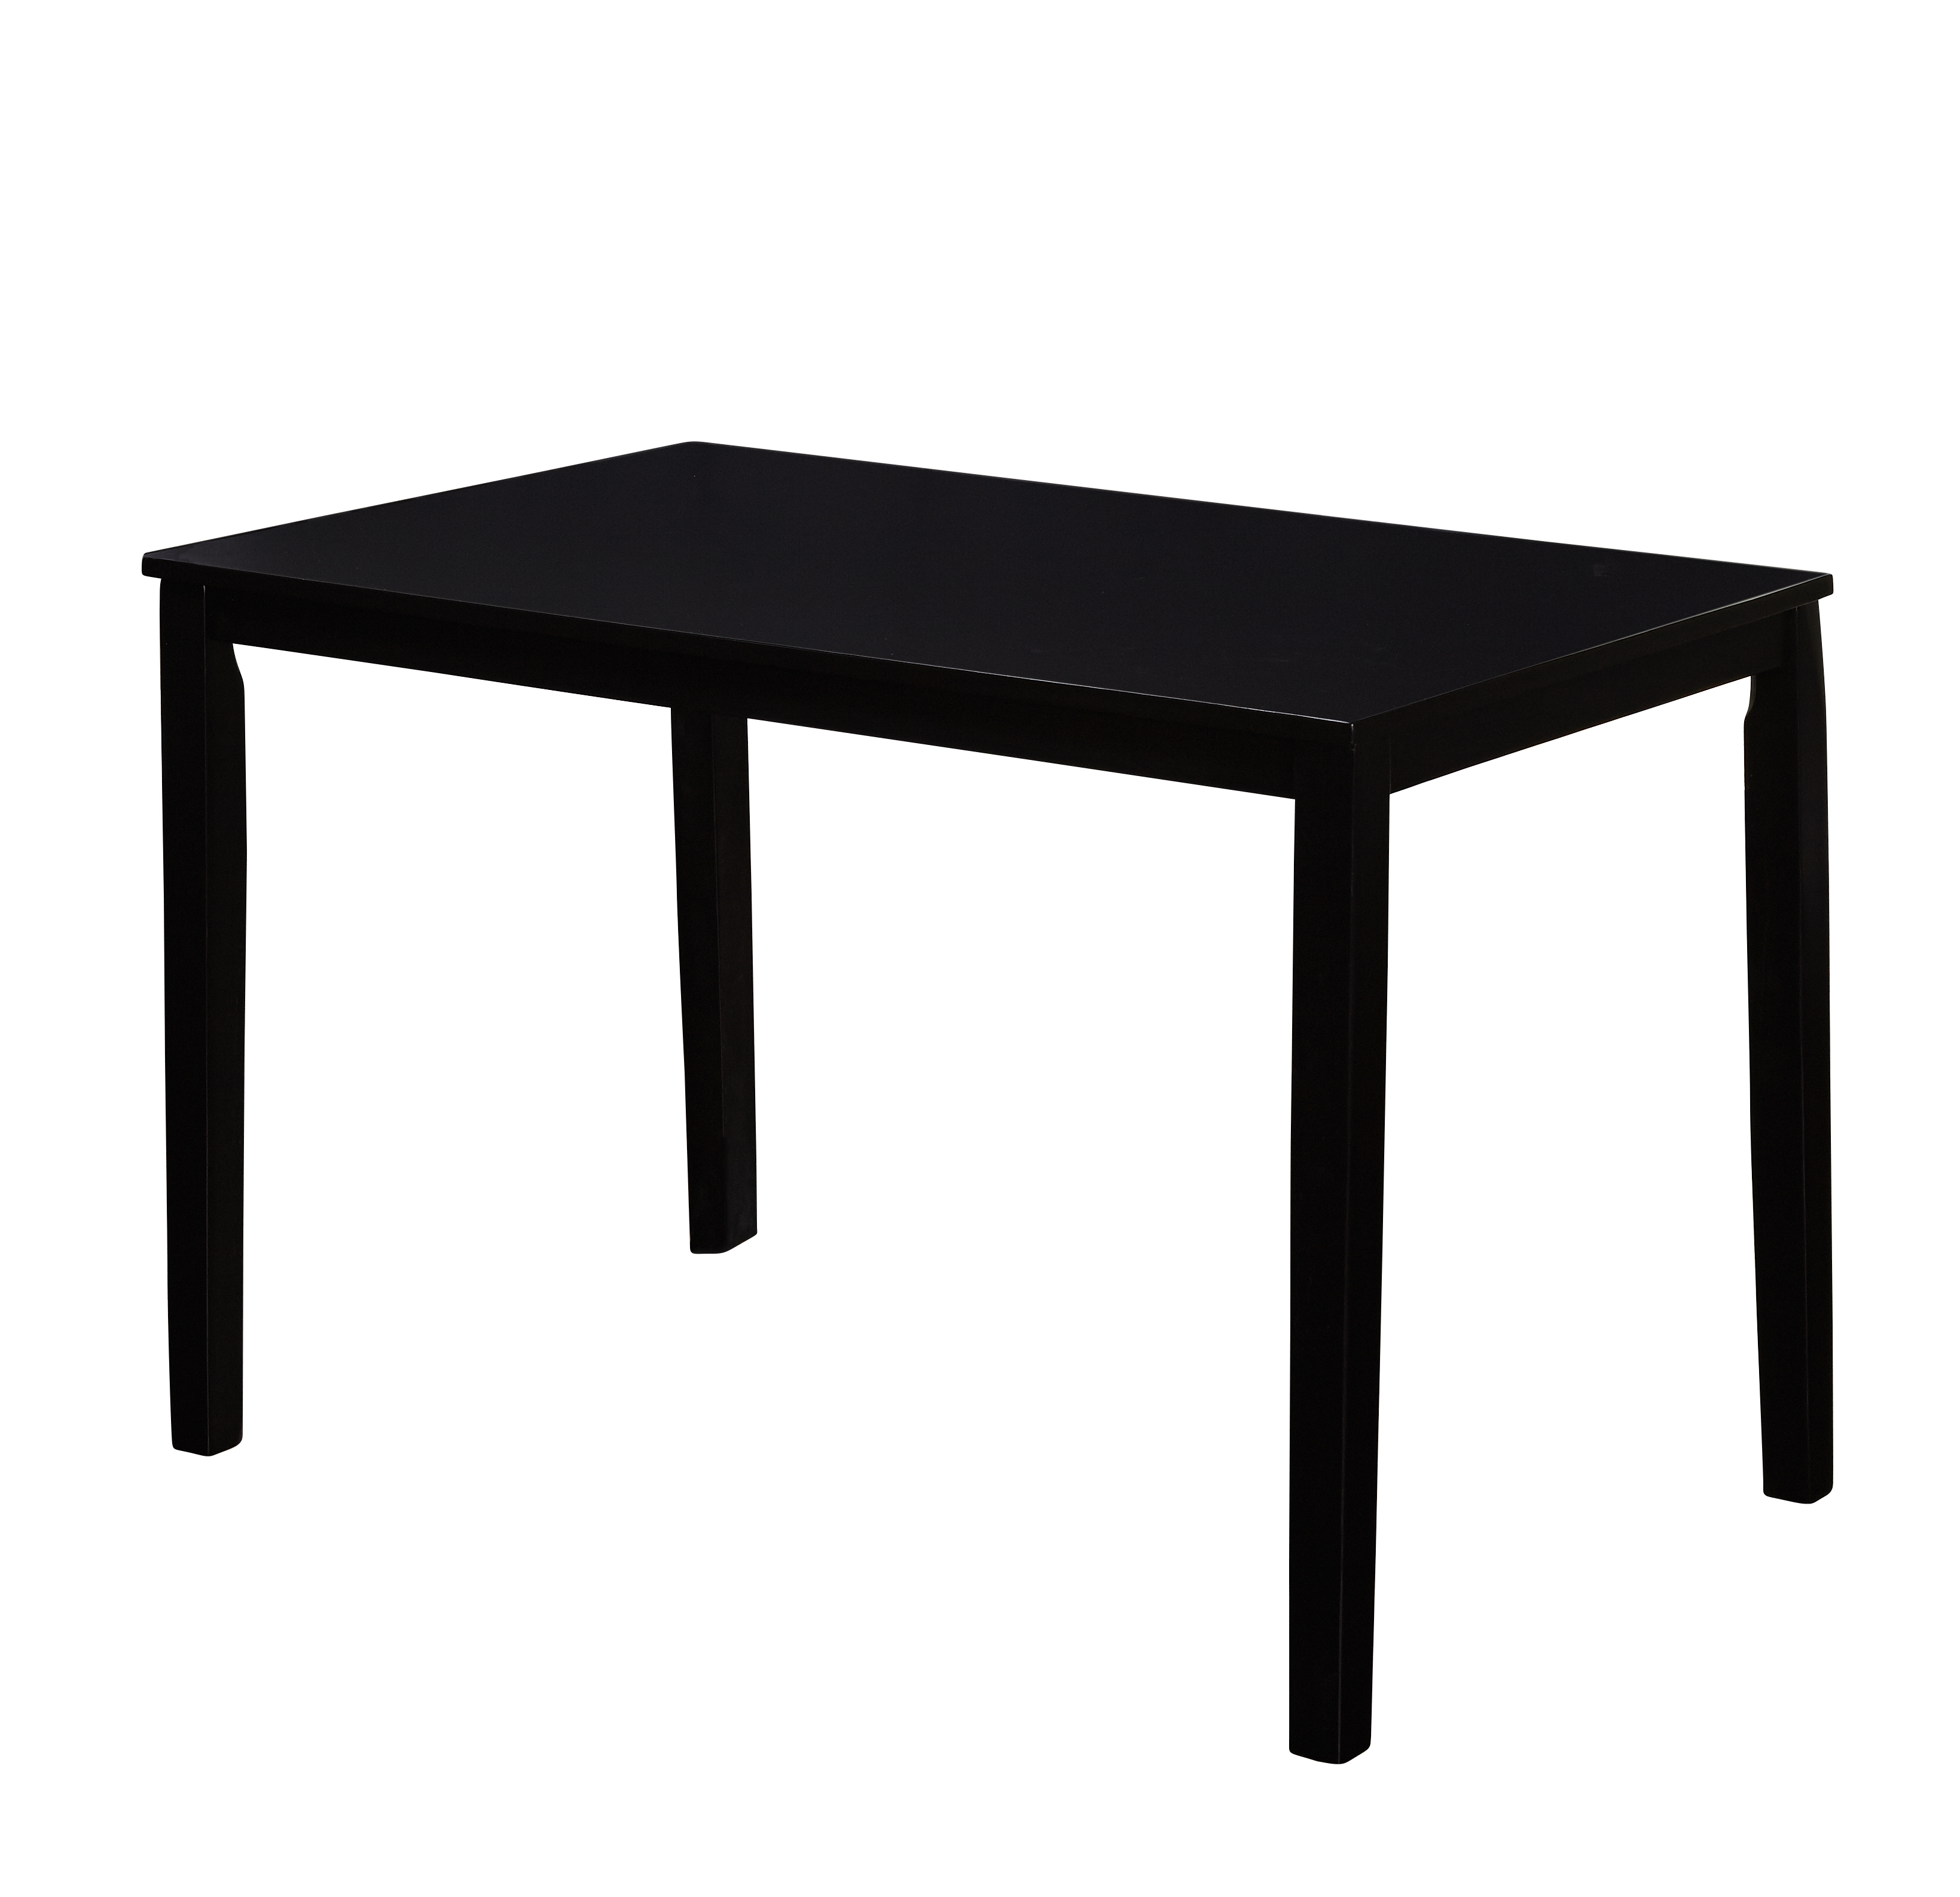 TMS Mid-Century Modern Dining Table, Multiple Finishes - image 1 of 7